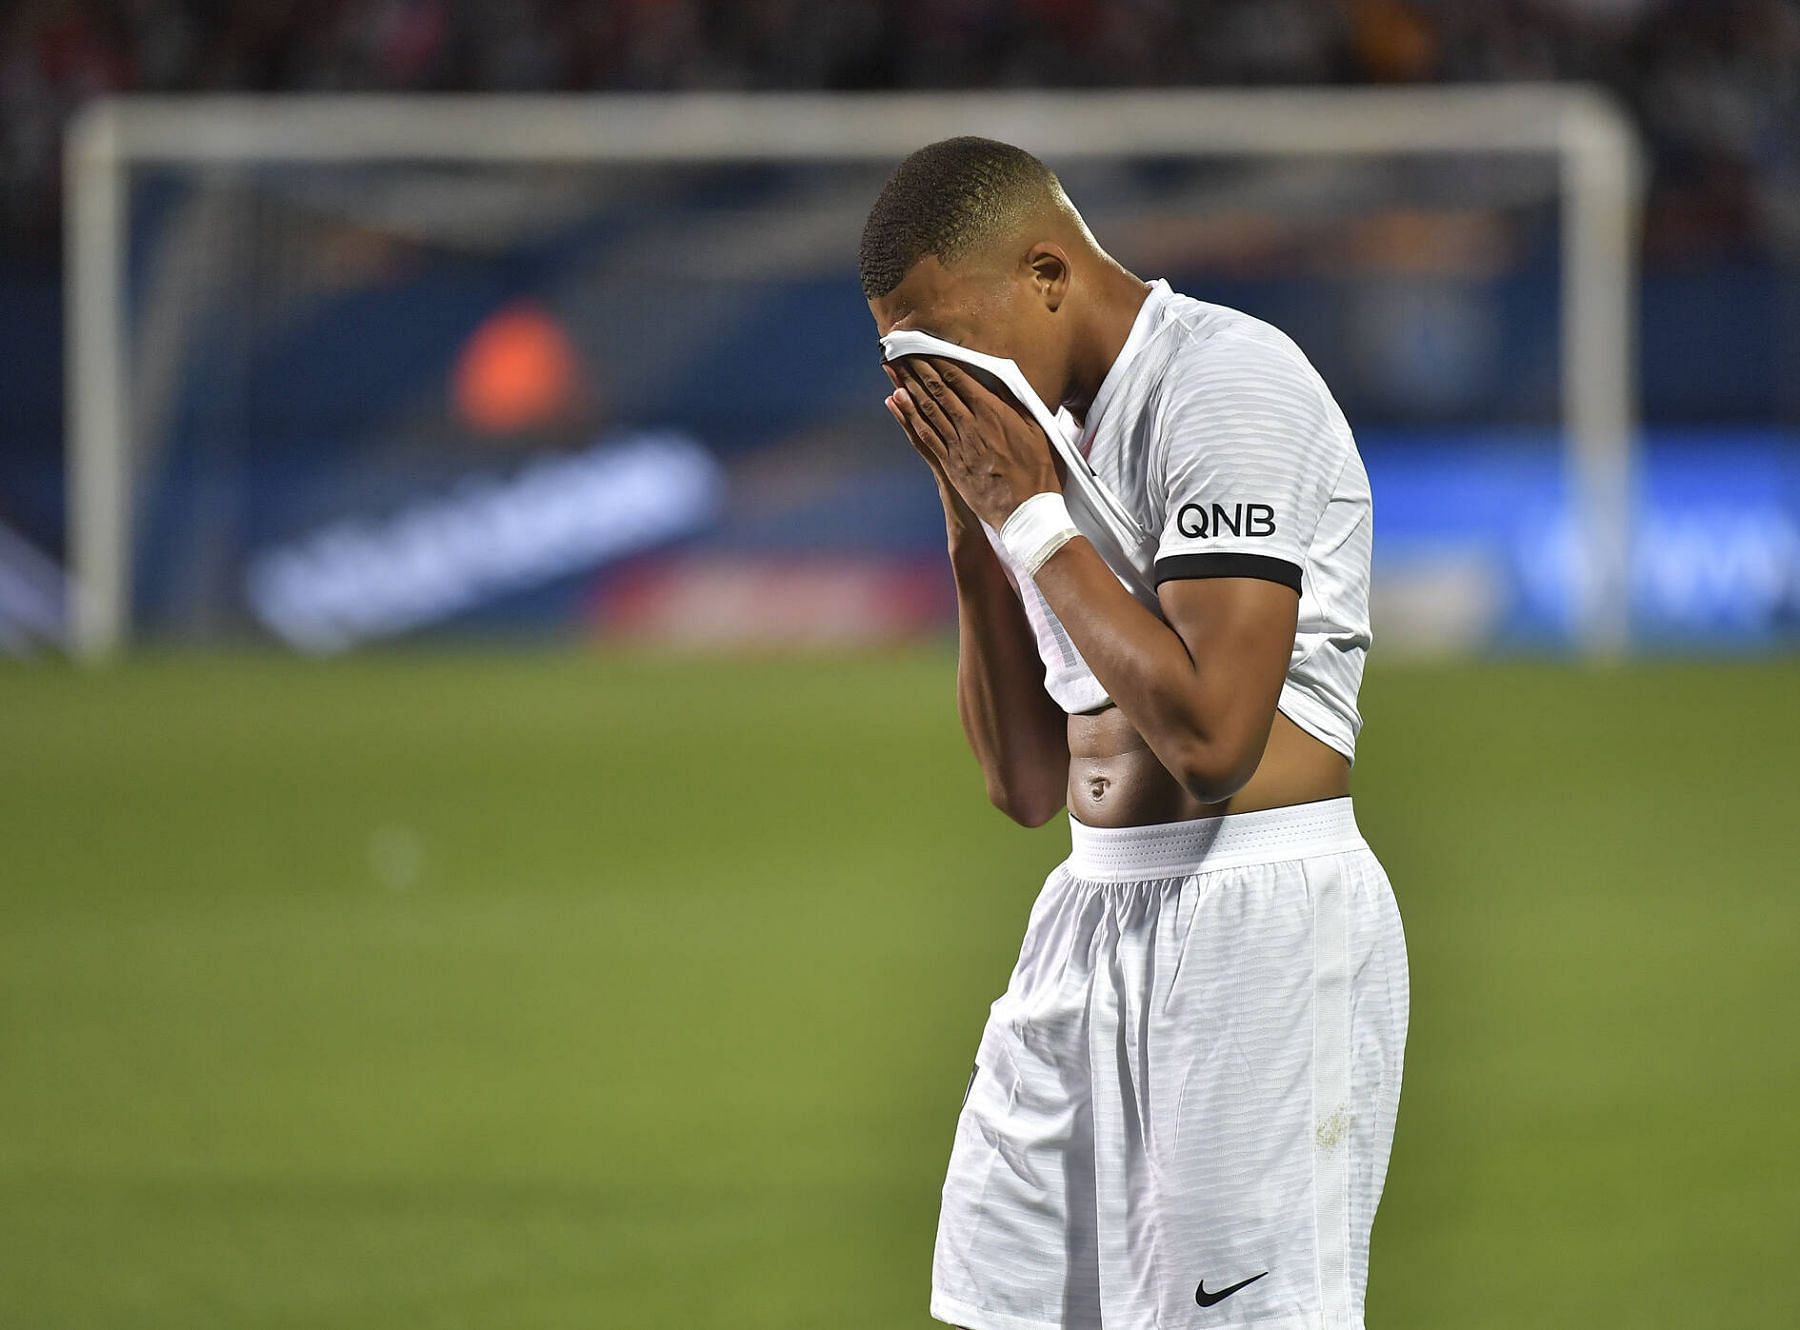 PSG were held to a goalless draw by Clermont in Ligue 1.